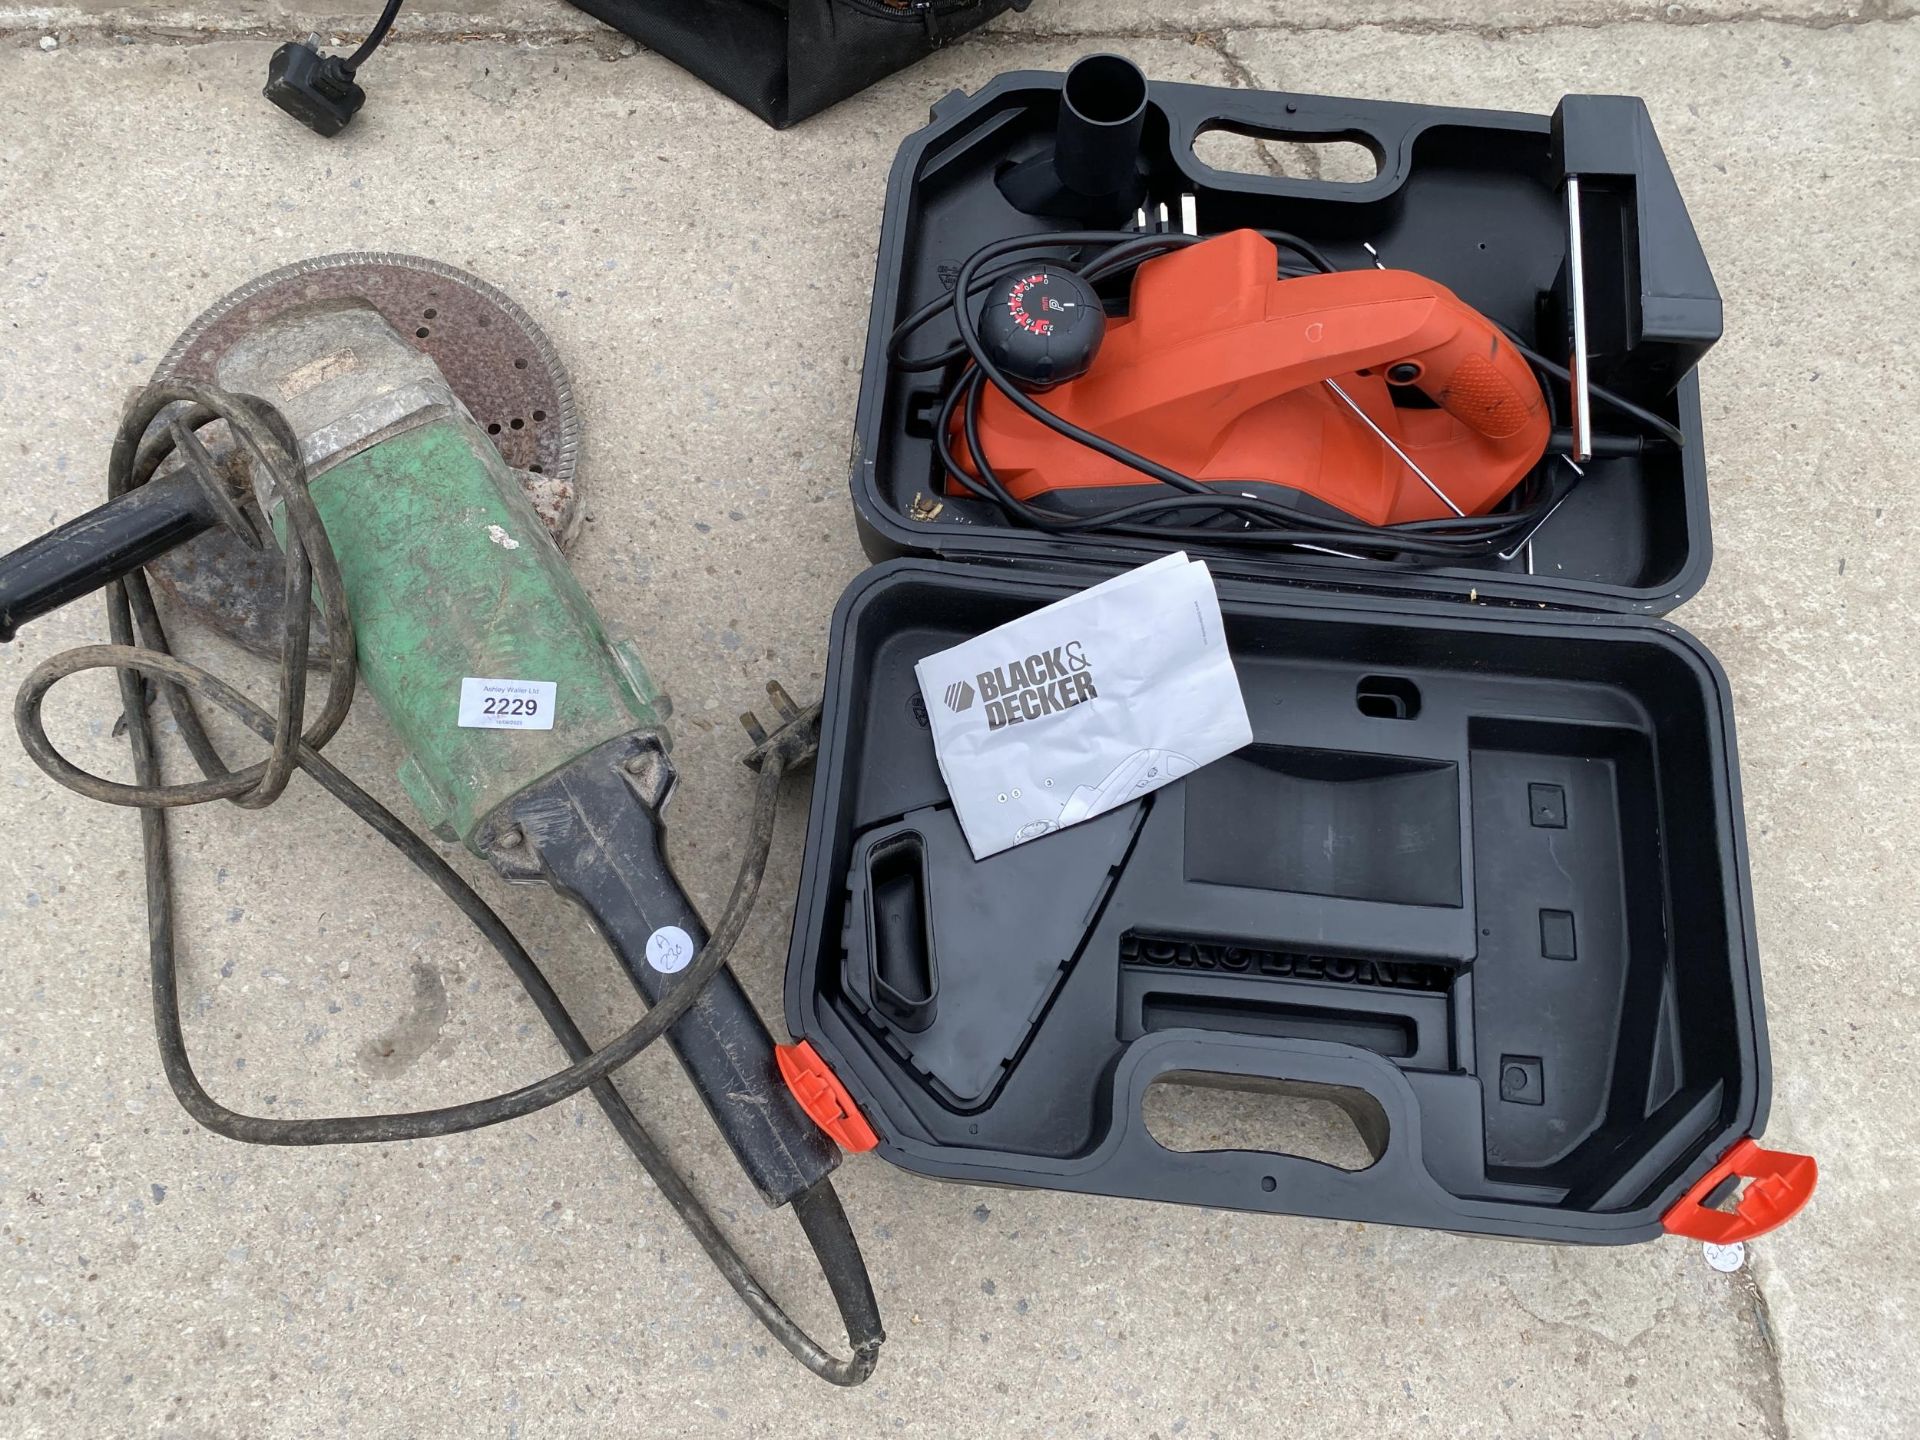 TWO POWER TOOLS, A HITACHI ANGLE GRINDER AND A BLACK AND DECKER PLANER